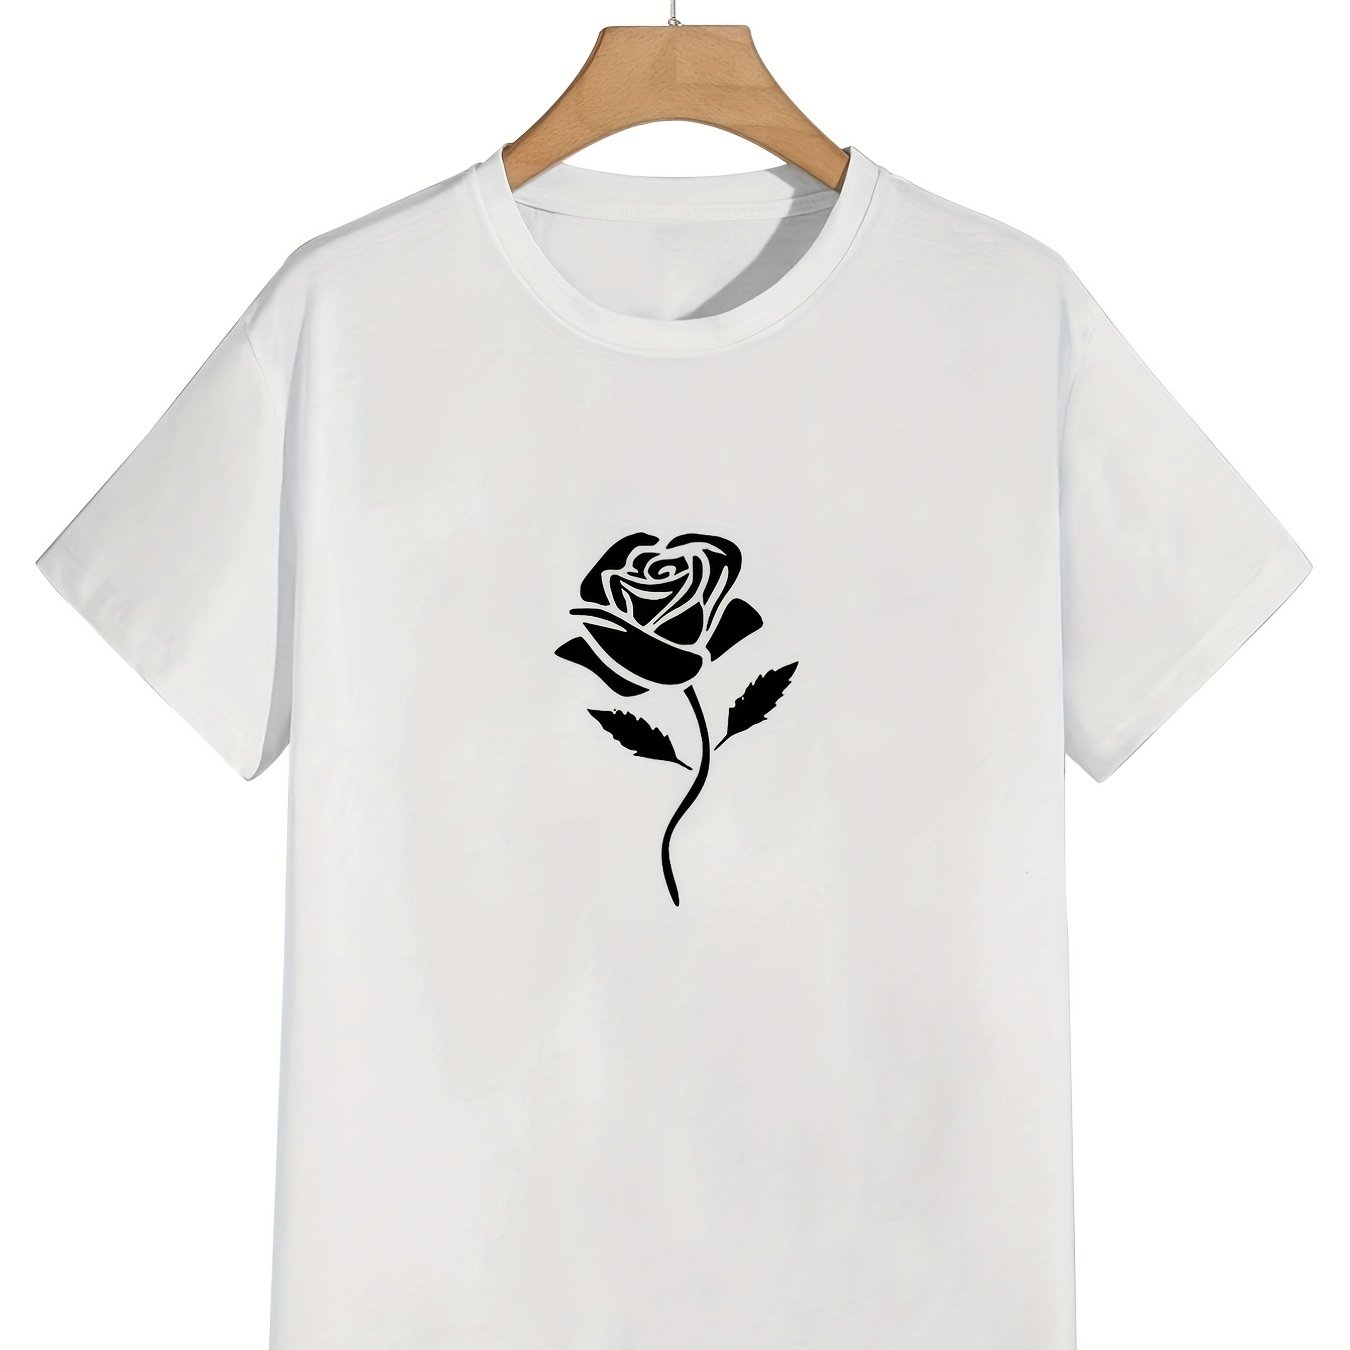 A Rose Relaxed T Shirt For Men Plus Size Comfy Summer Graphic Tee For ...